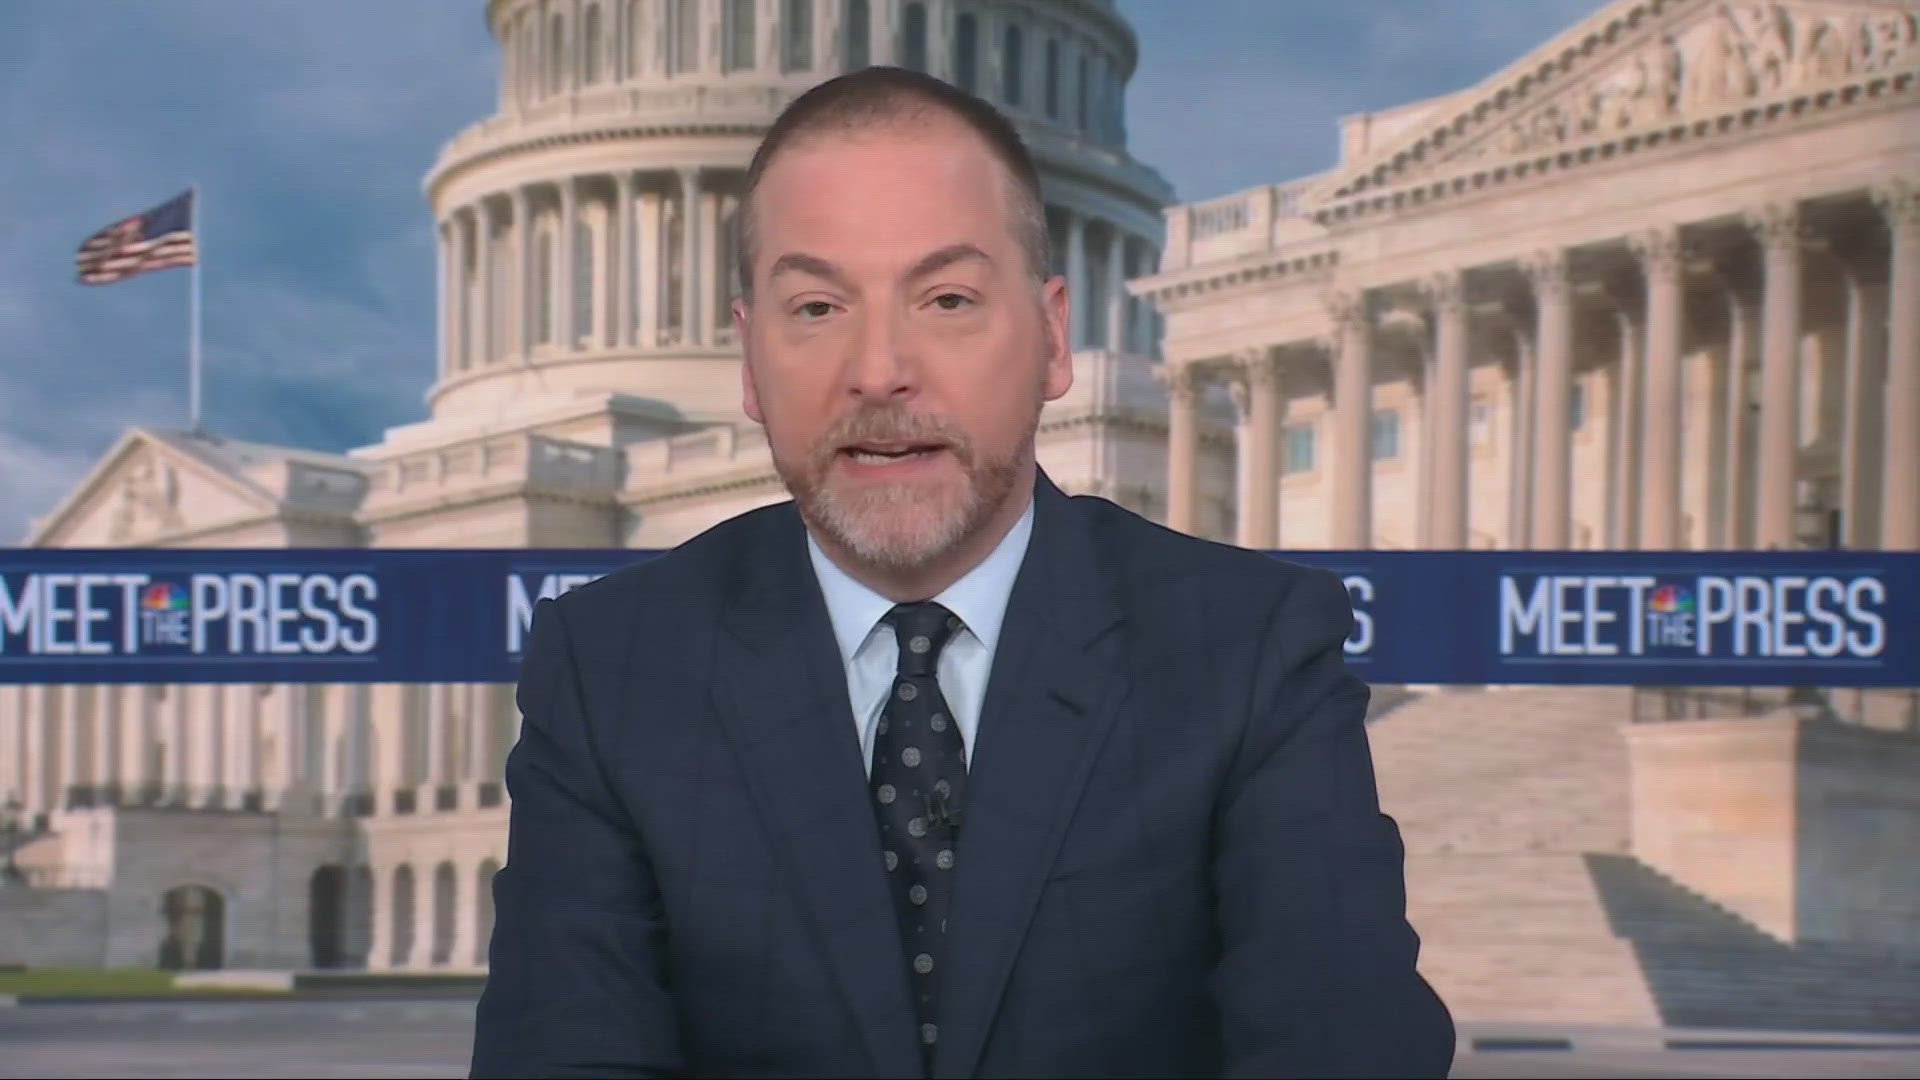 We spoke with Chuck Todd of NBC's 'Meet The Press' after former President Trump announced he expects to be arrested Tuesday.